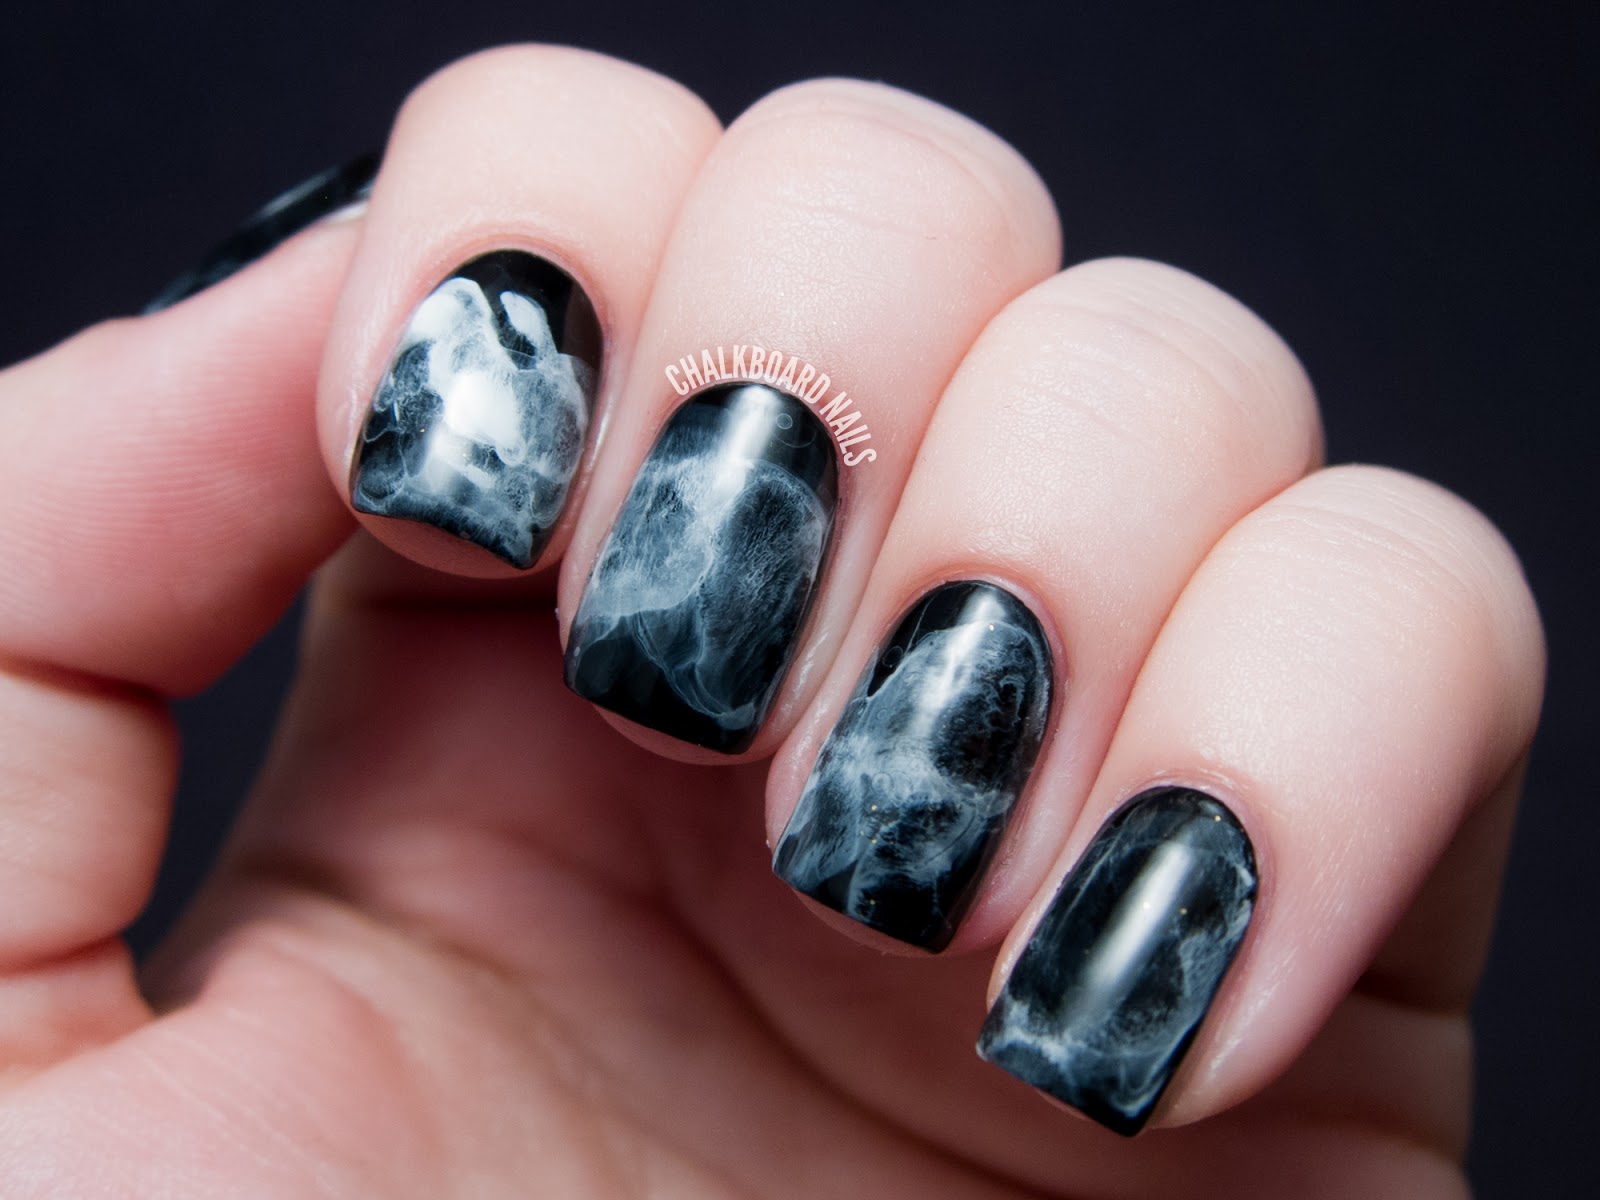 Black and White Nail Art Inspiration - wide 2